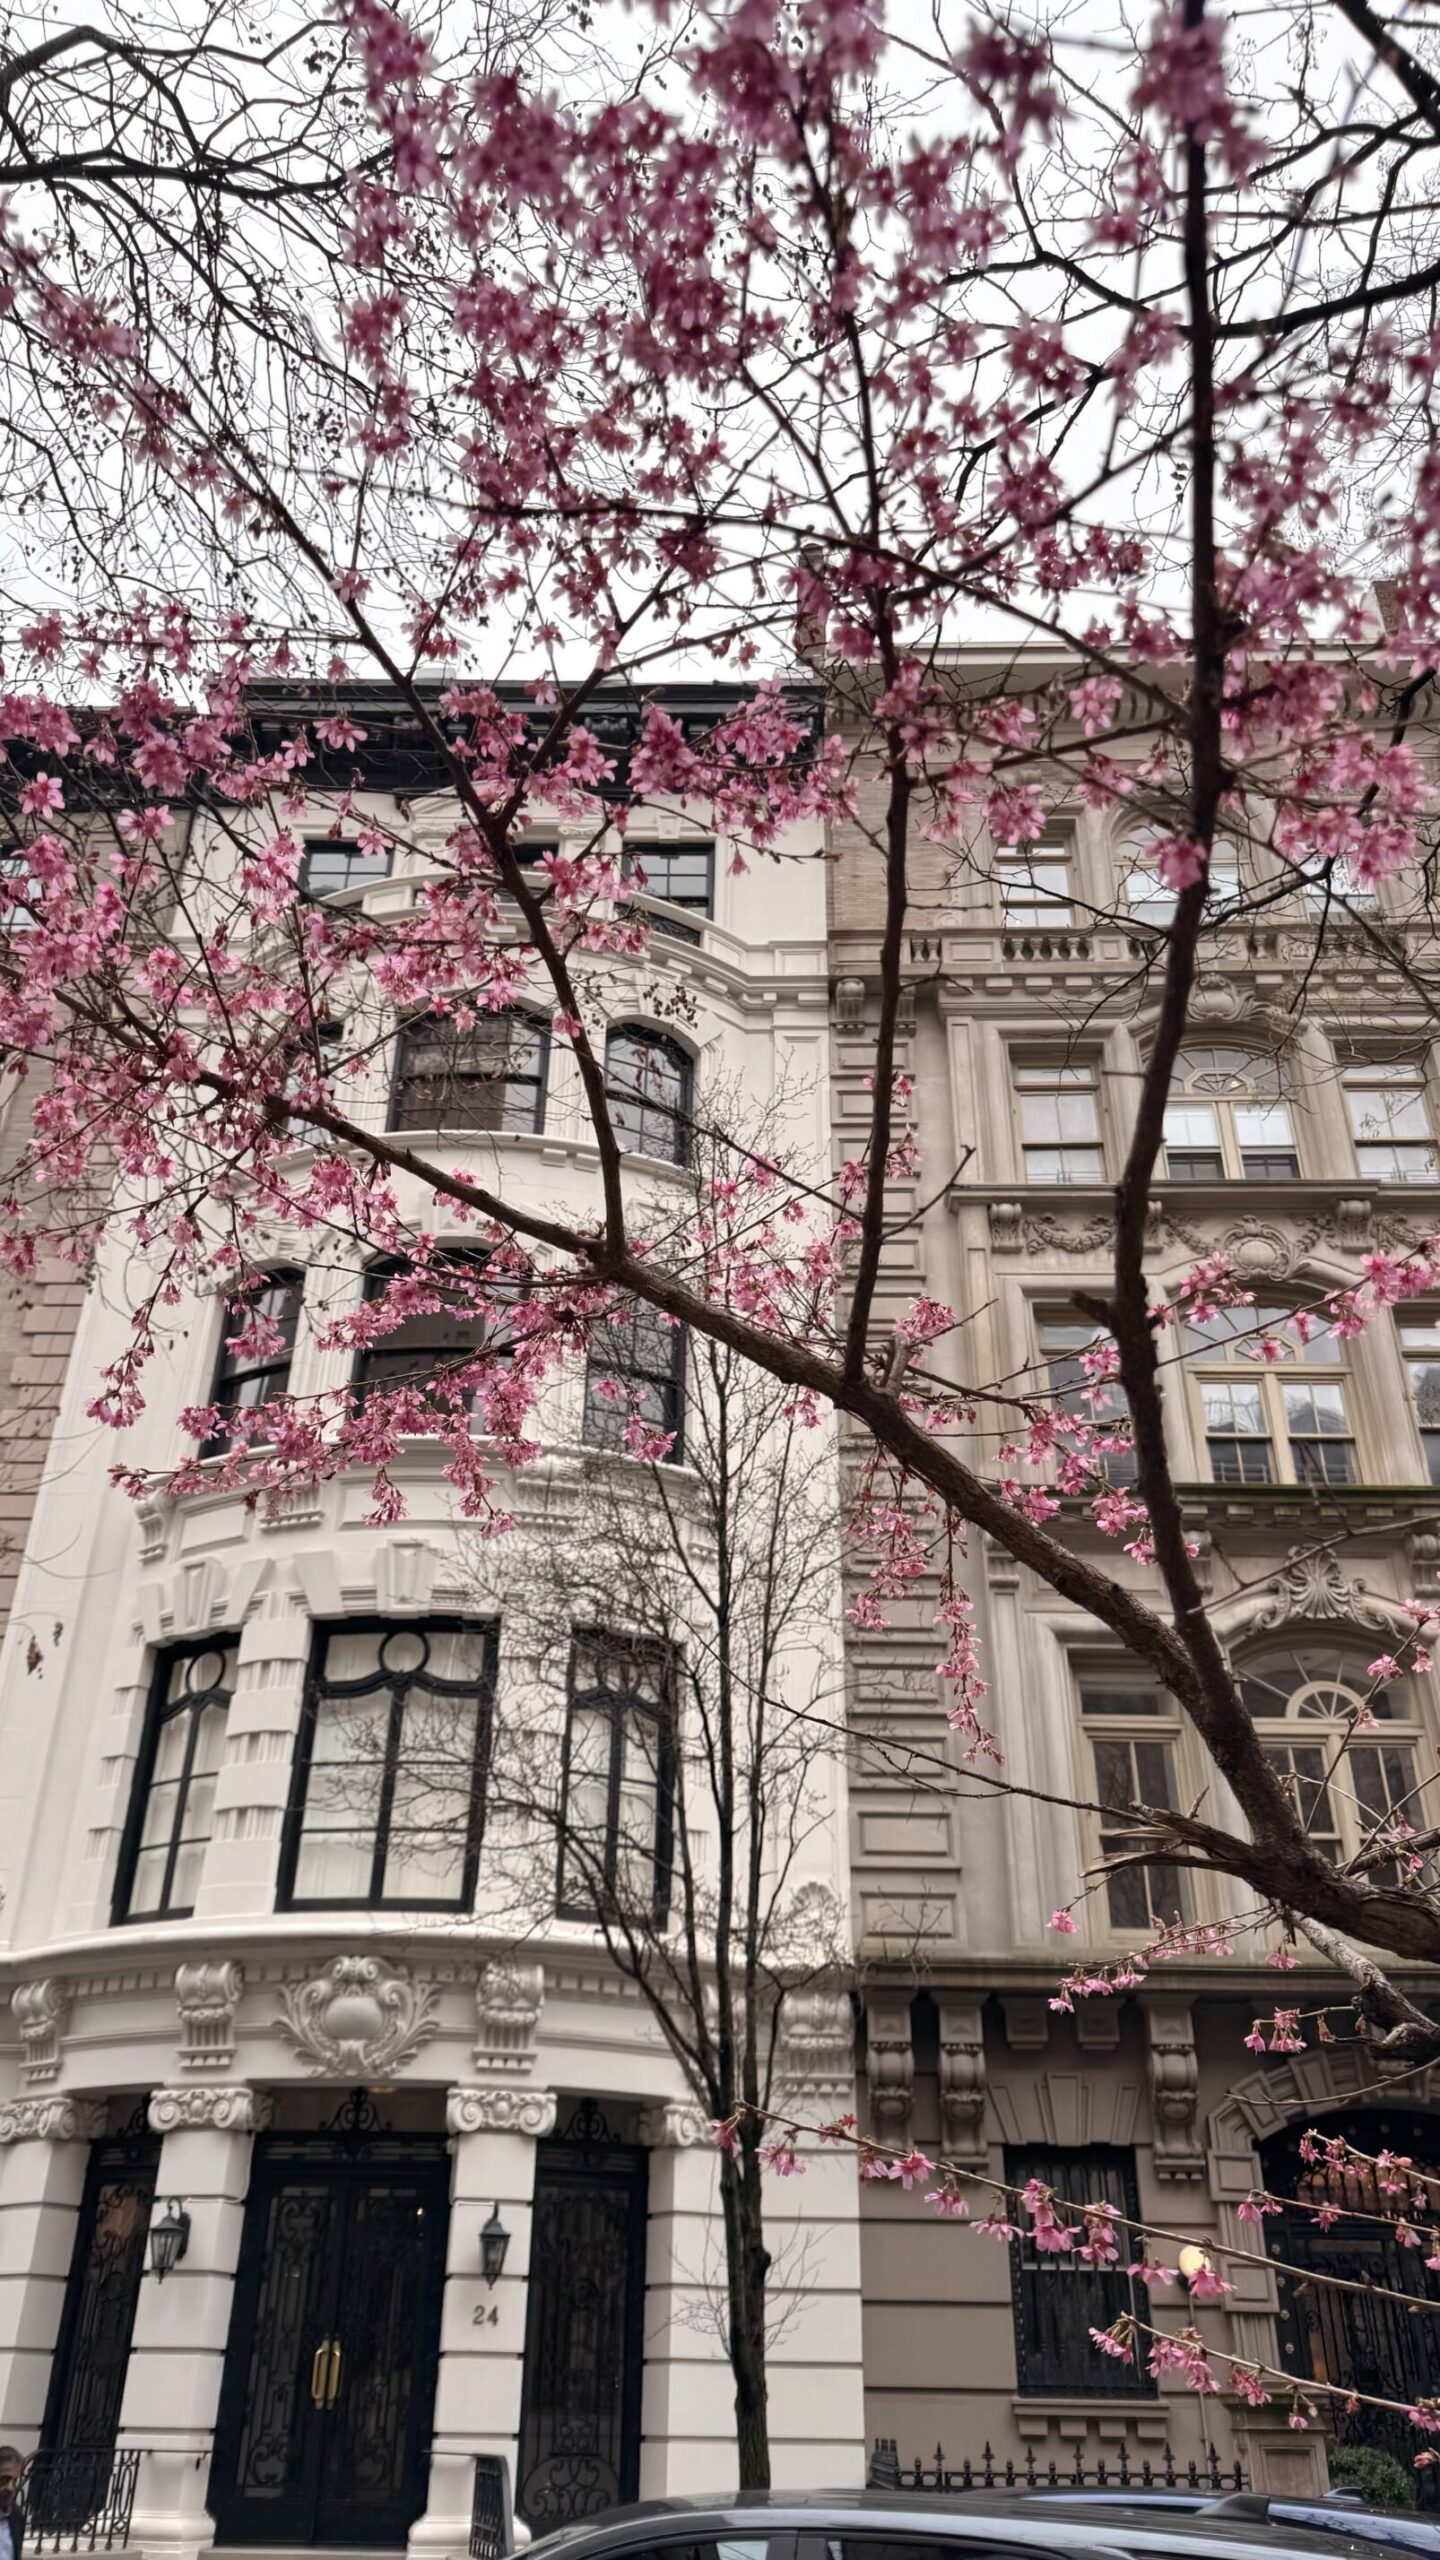 A New York City townhouse with a pretty pink tree in front of it.